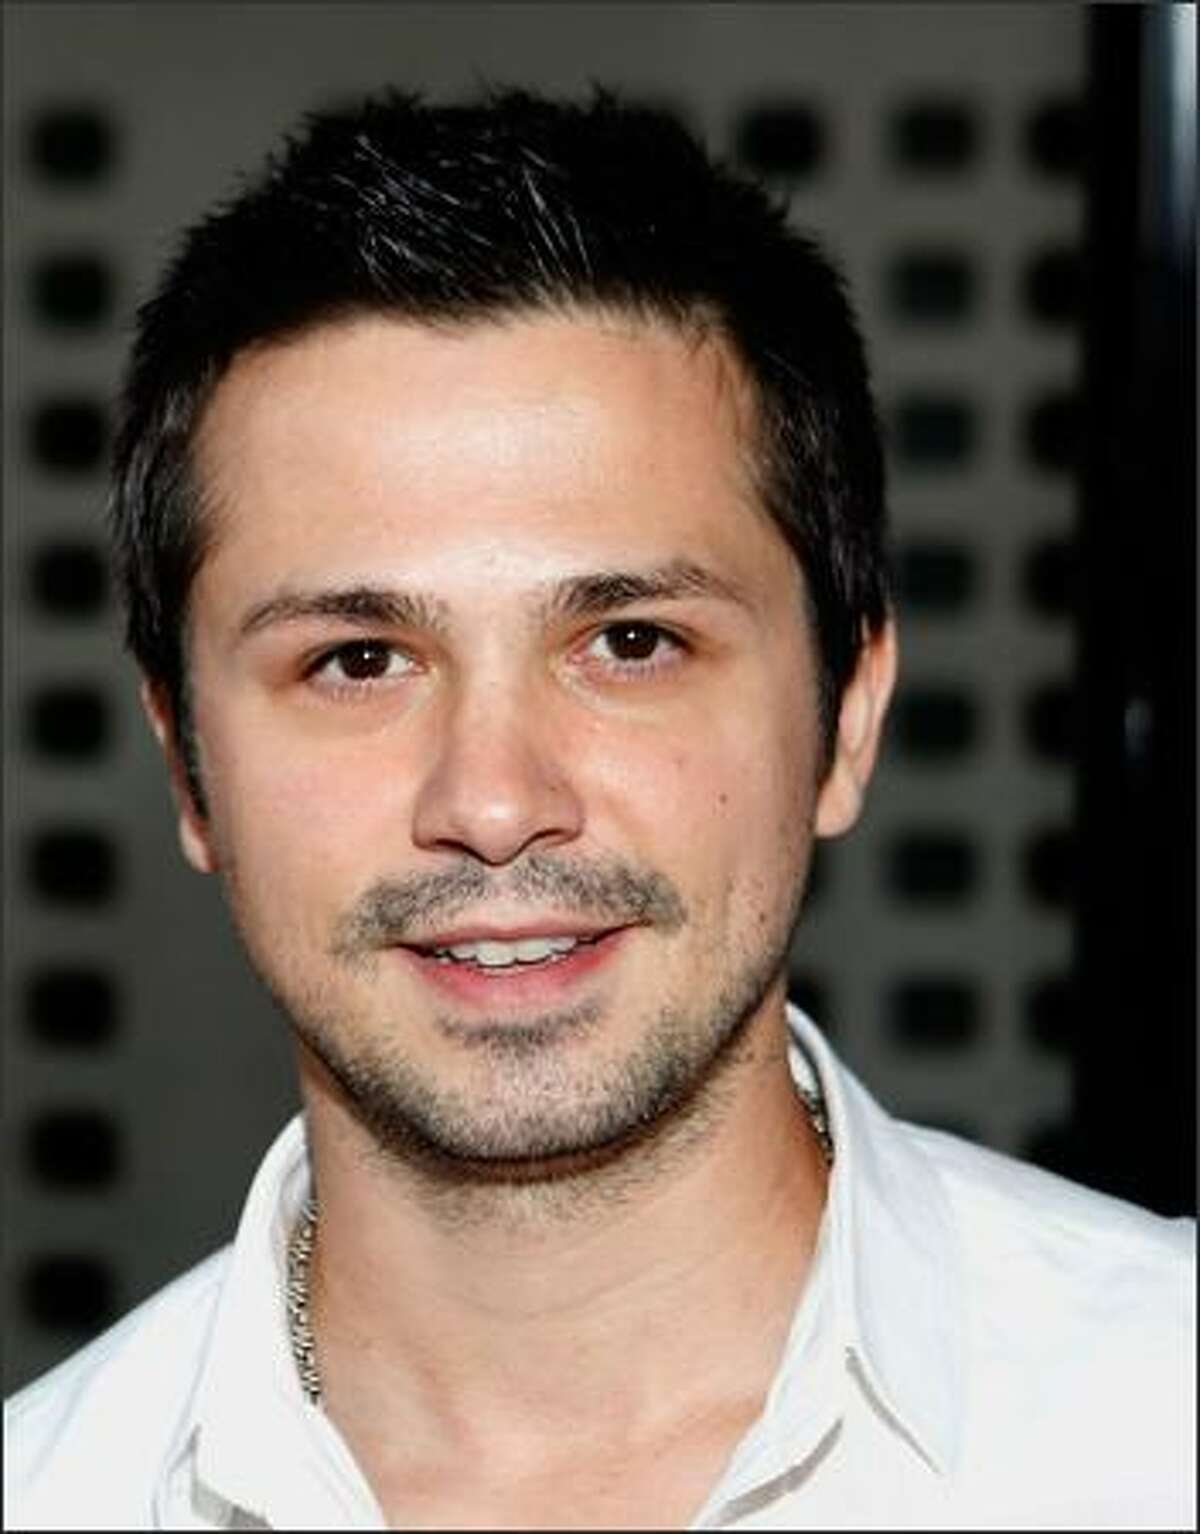 Actor Freddy Rodriguez arrives at the Los Angeles premiere of HBO's series "True Blood" at the Cinerama Dome on Thursday in Hollywood, Calif.